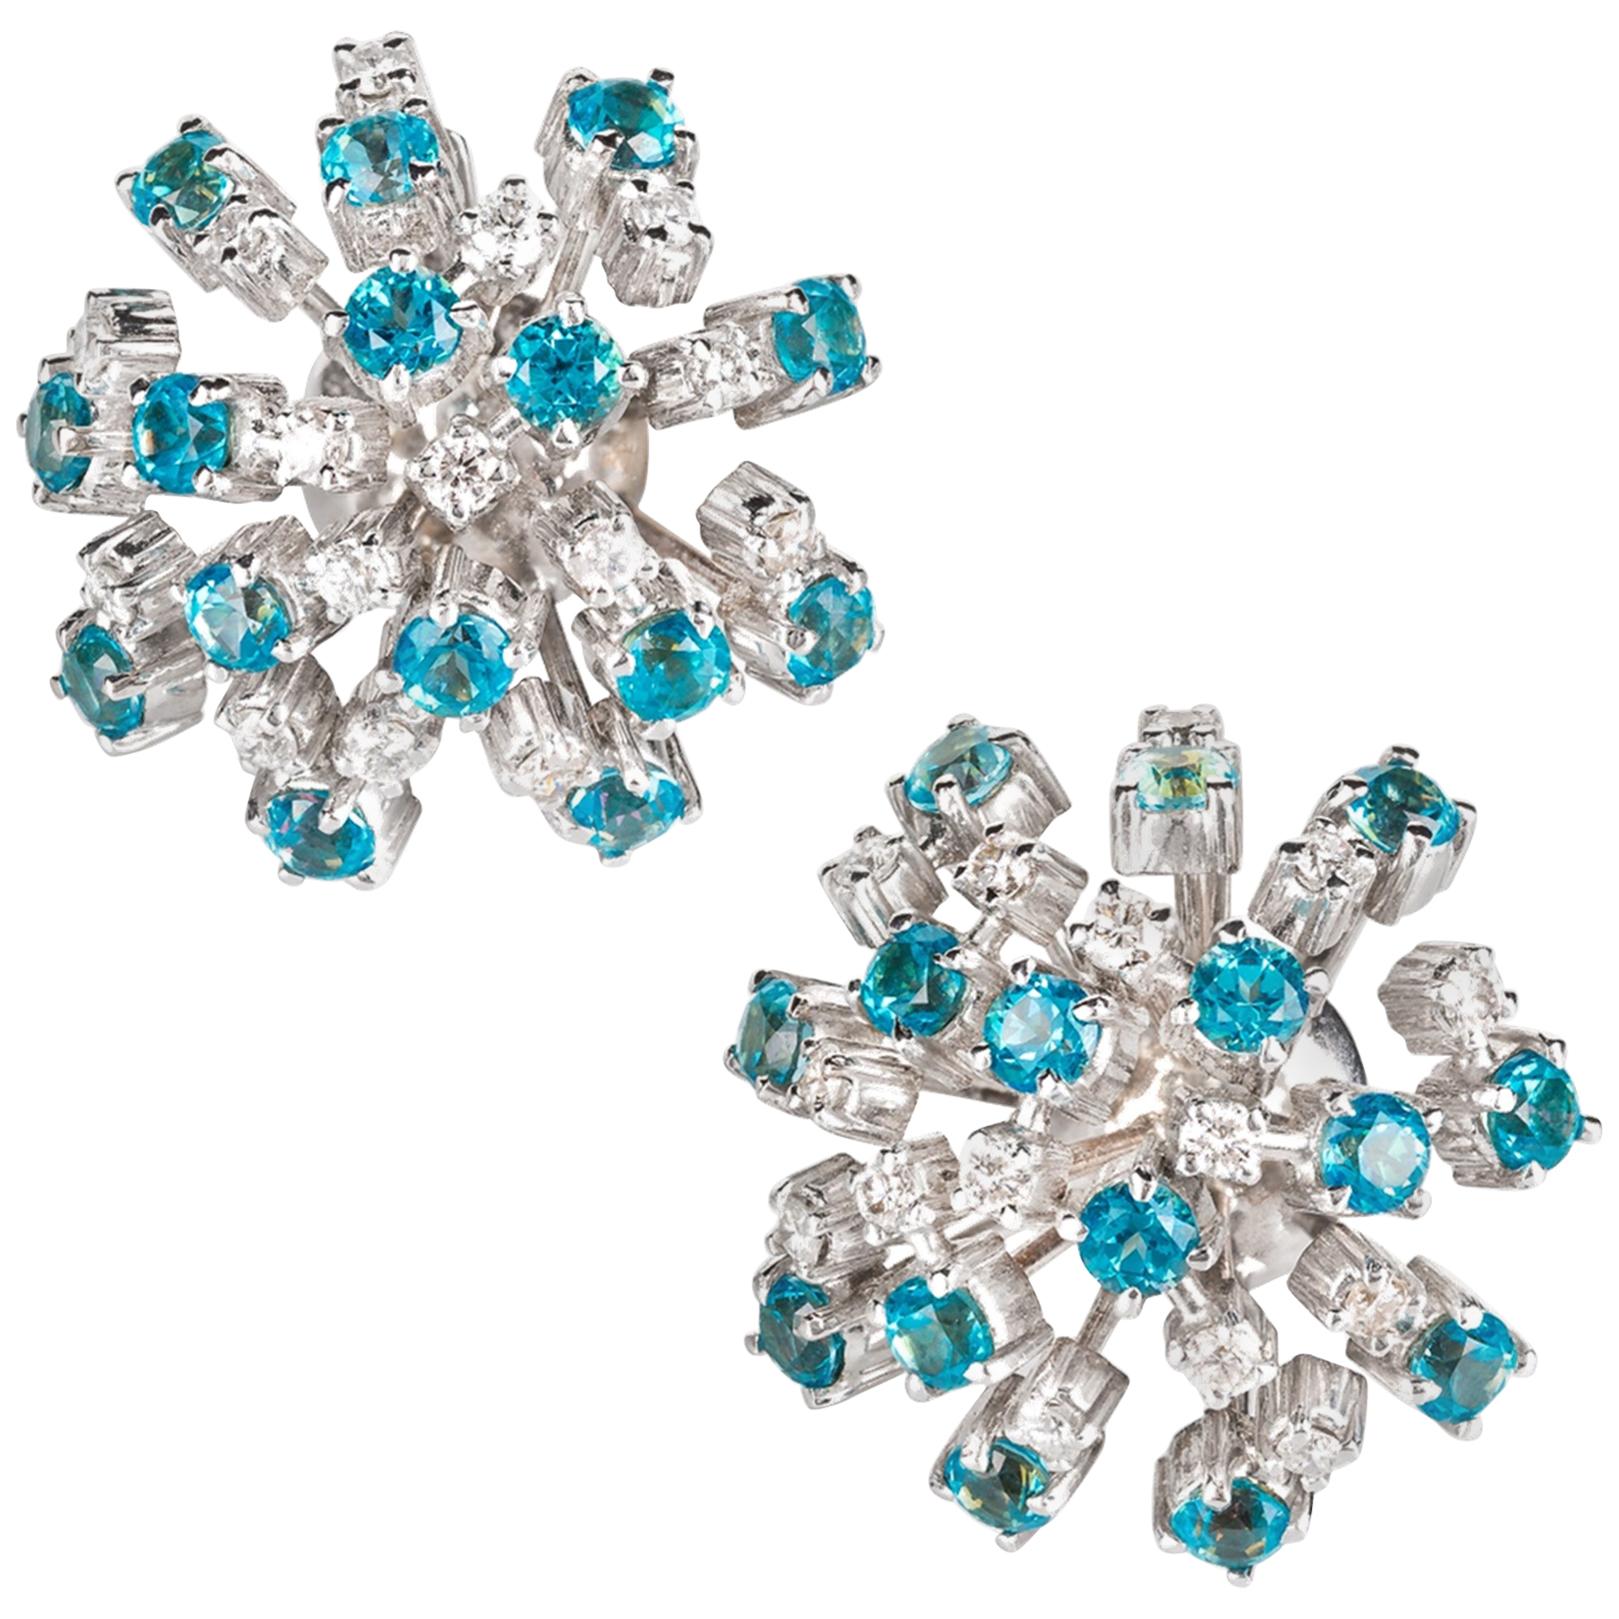 One-off Blue Topaz and Diamond Clip Earrings set in White Gold